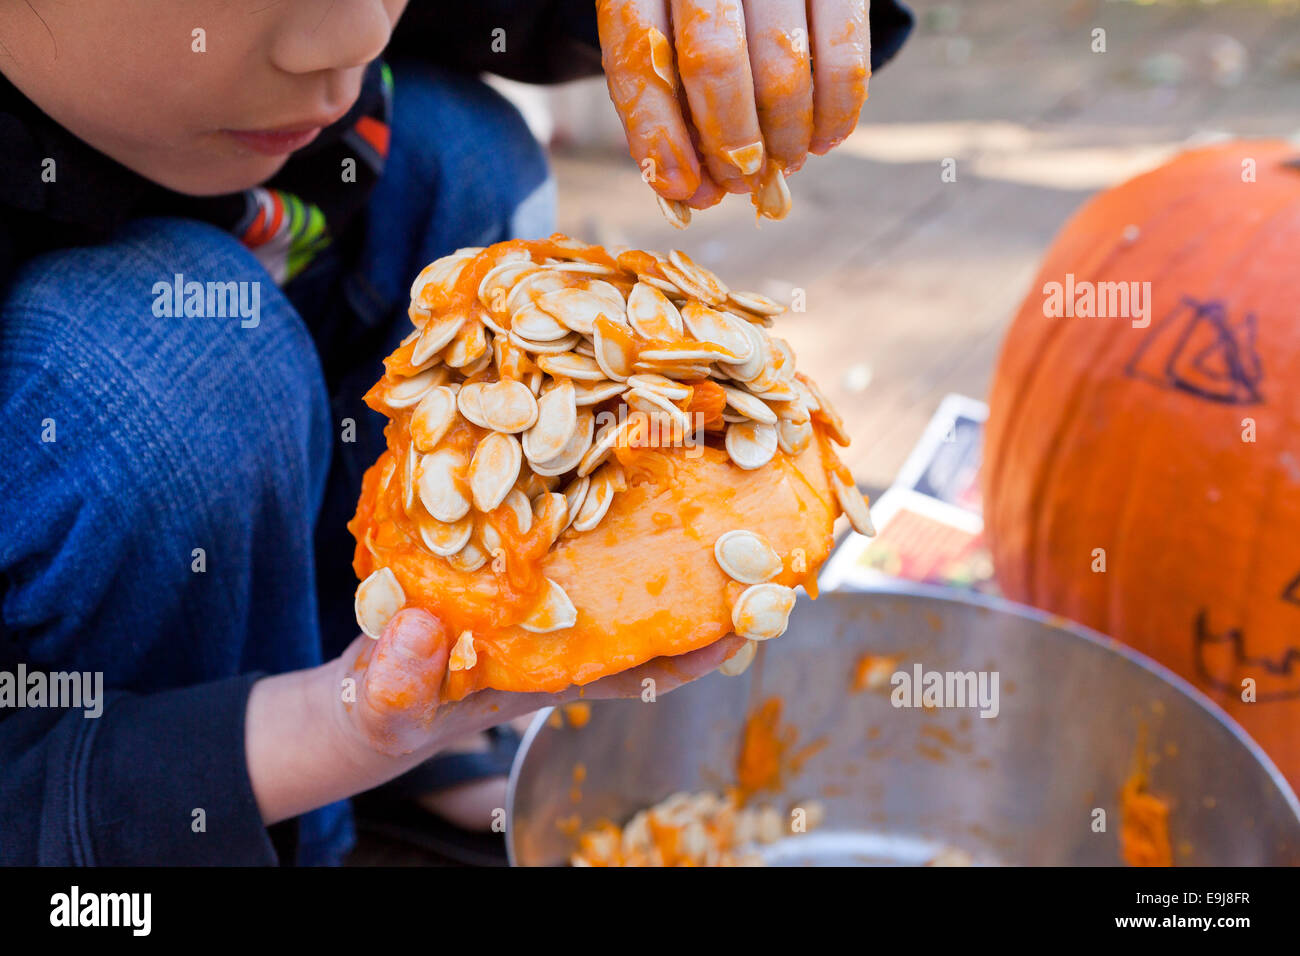 Child removing seeds from pumpkin - USA Stock Photo